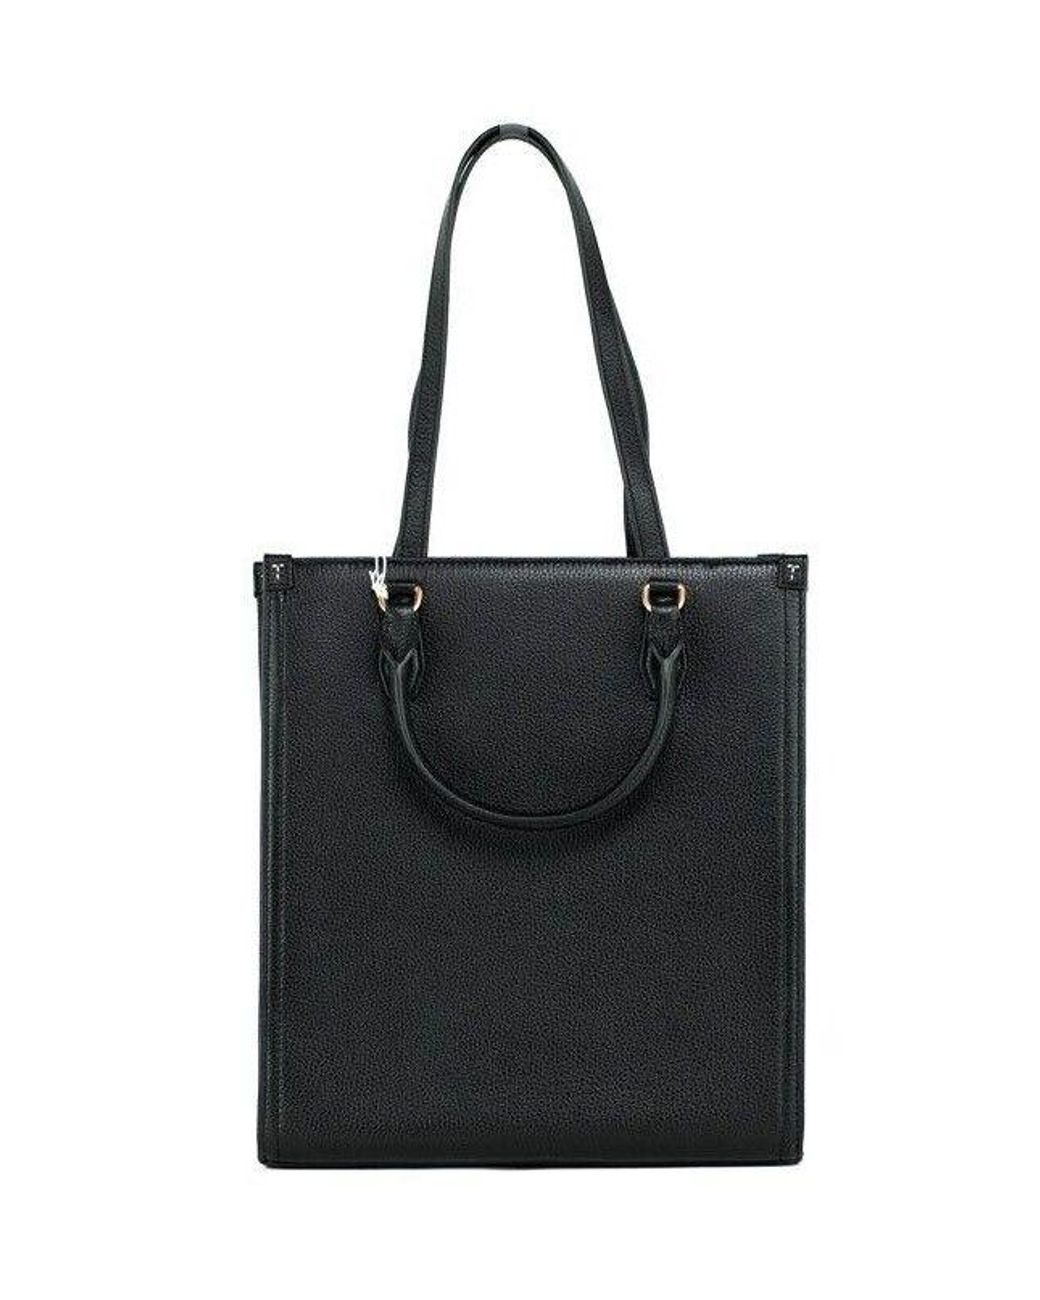  Tory Burch Blake Tote bag in Black : Clothing, Shoes & Jewelry